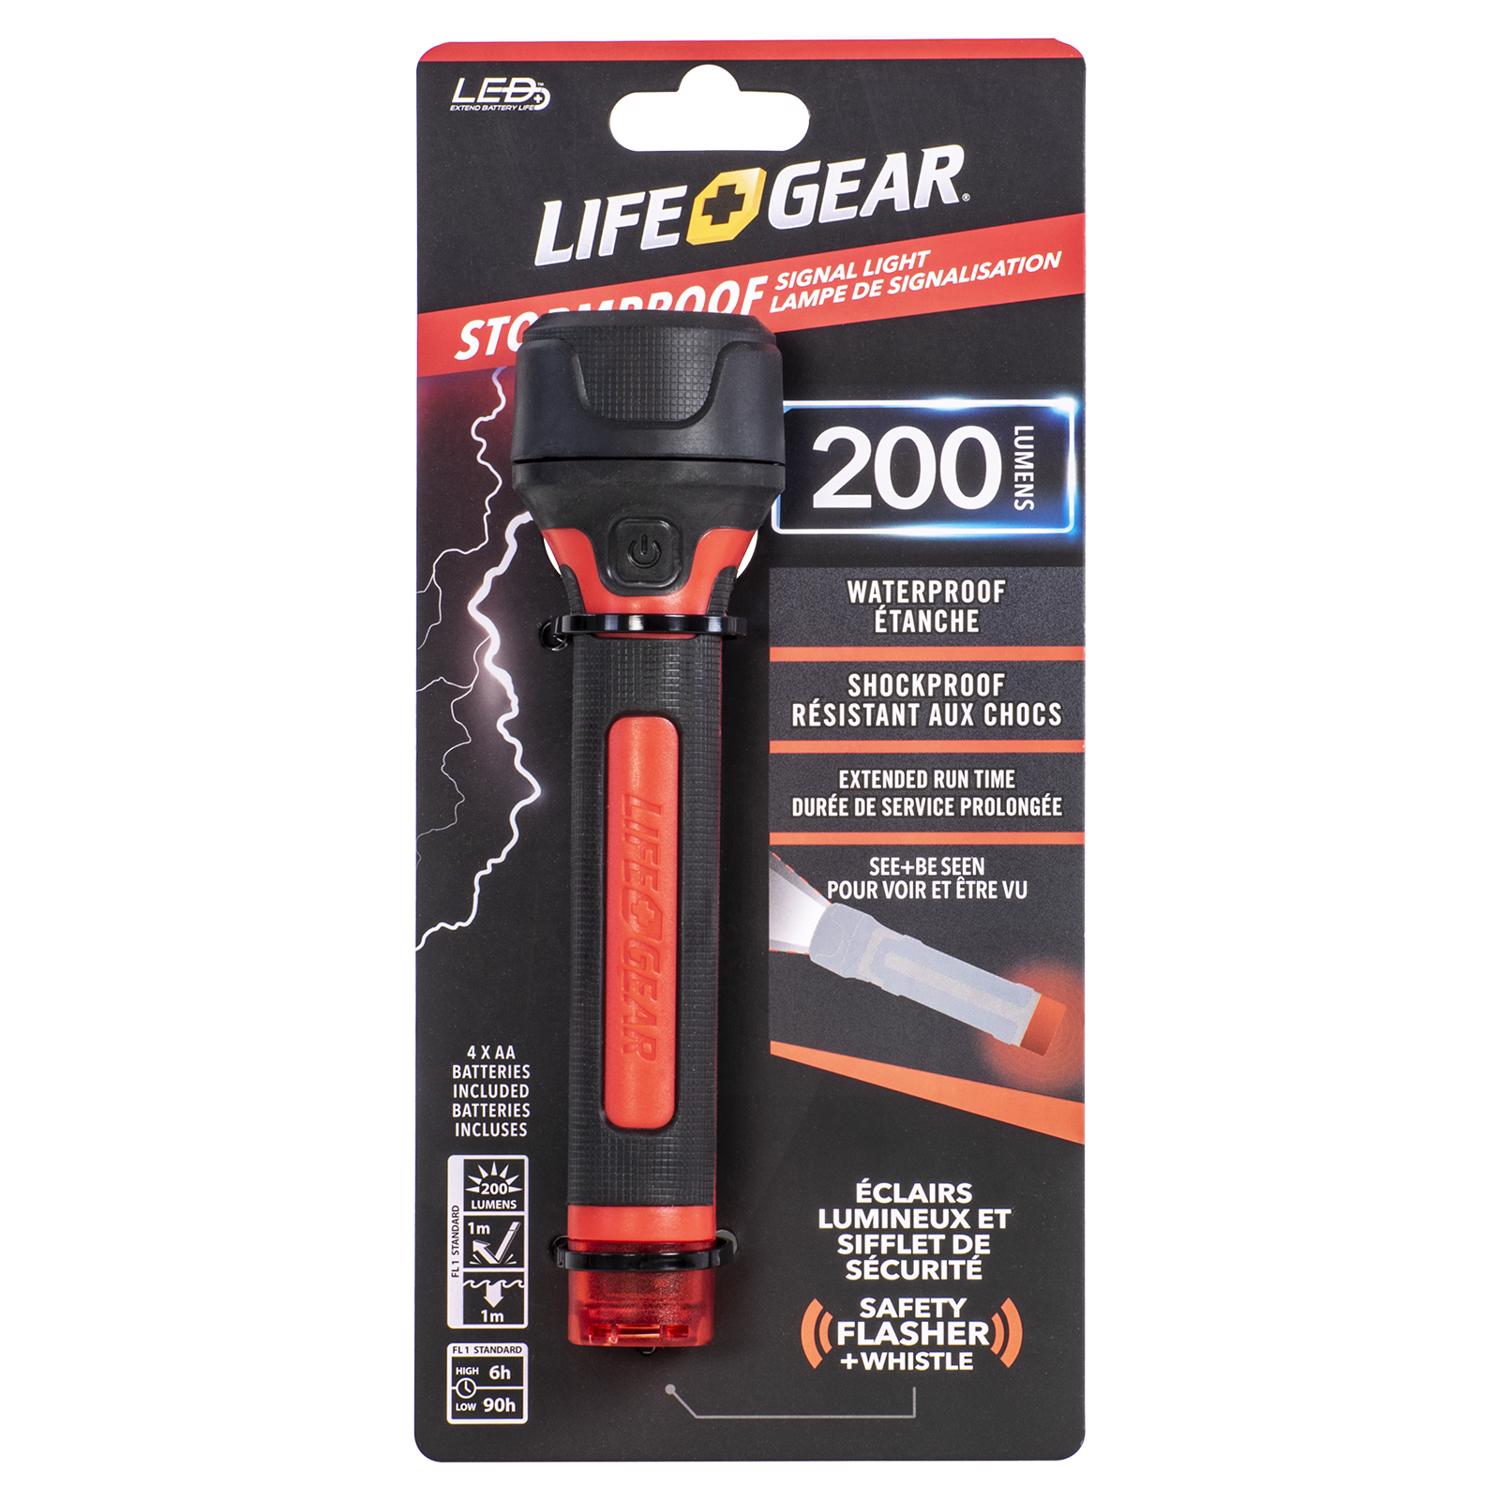 Photos - Torch Life+Gear 200 lm Black/Red LED Signal Light AA Battery BA38-60633-RED